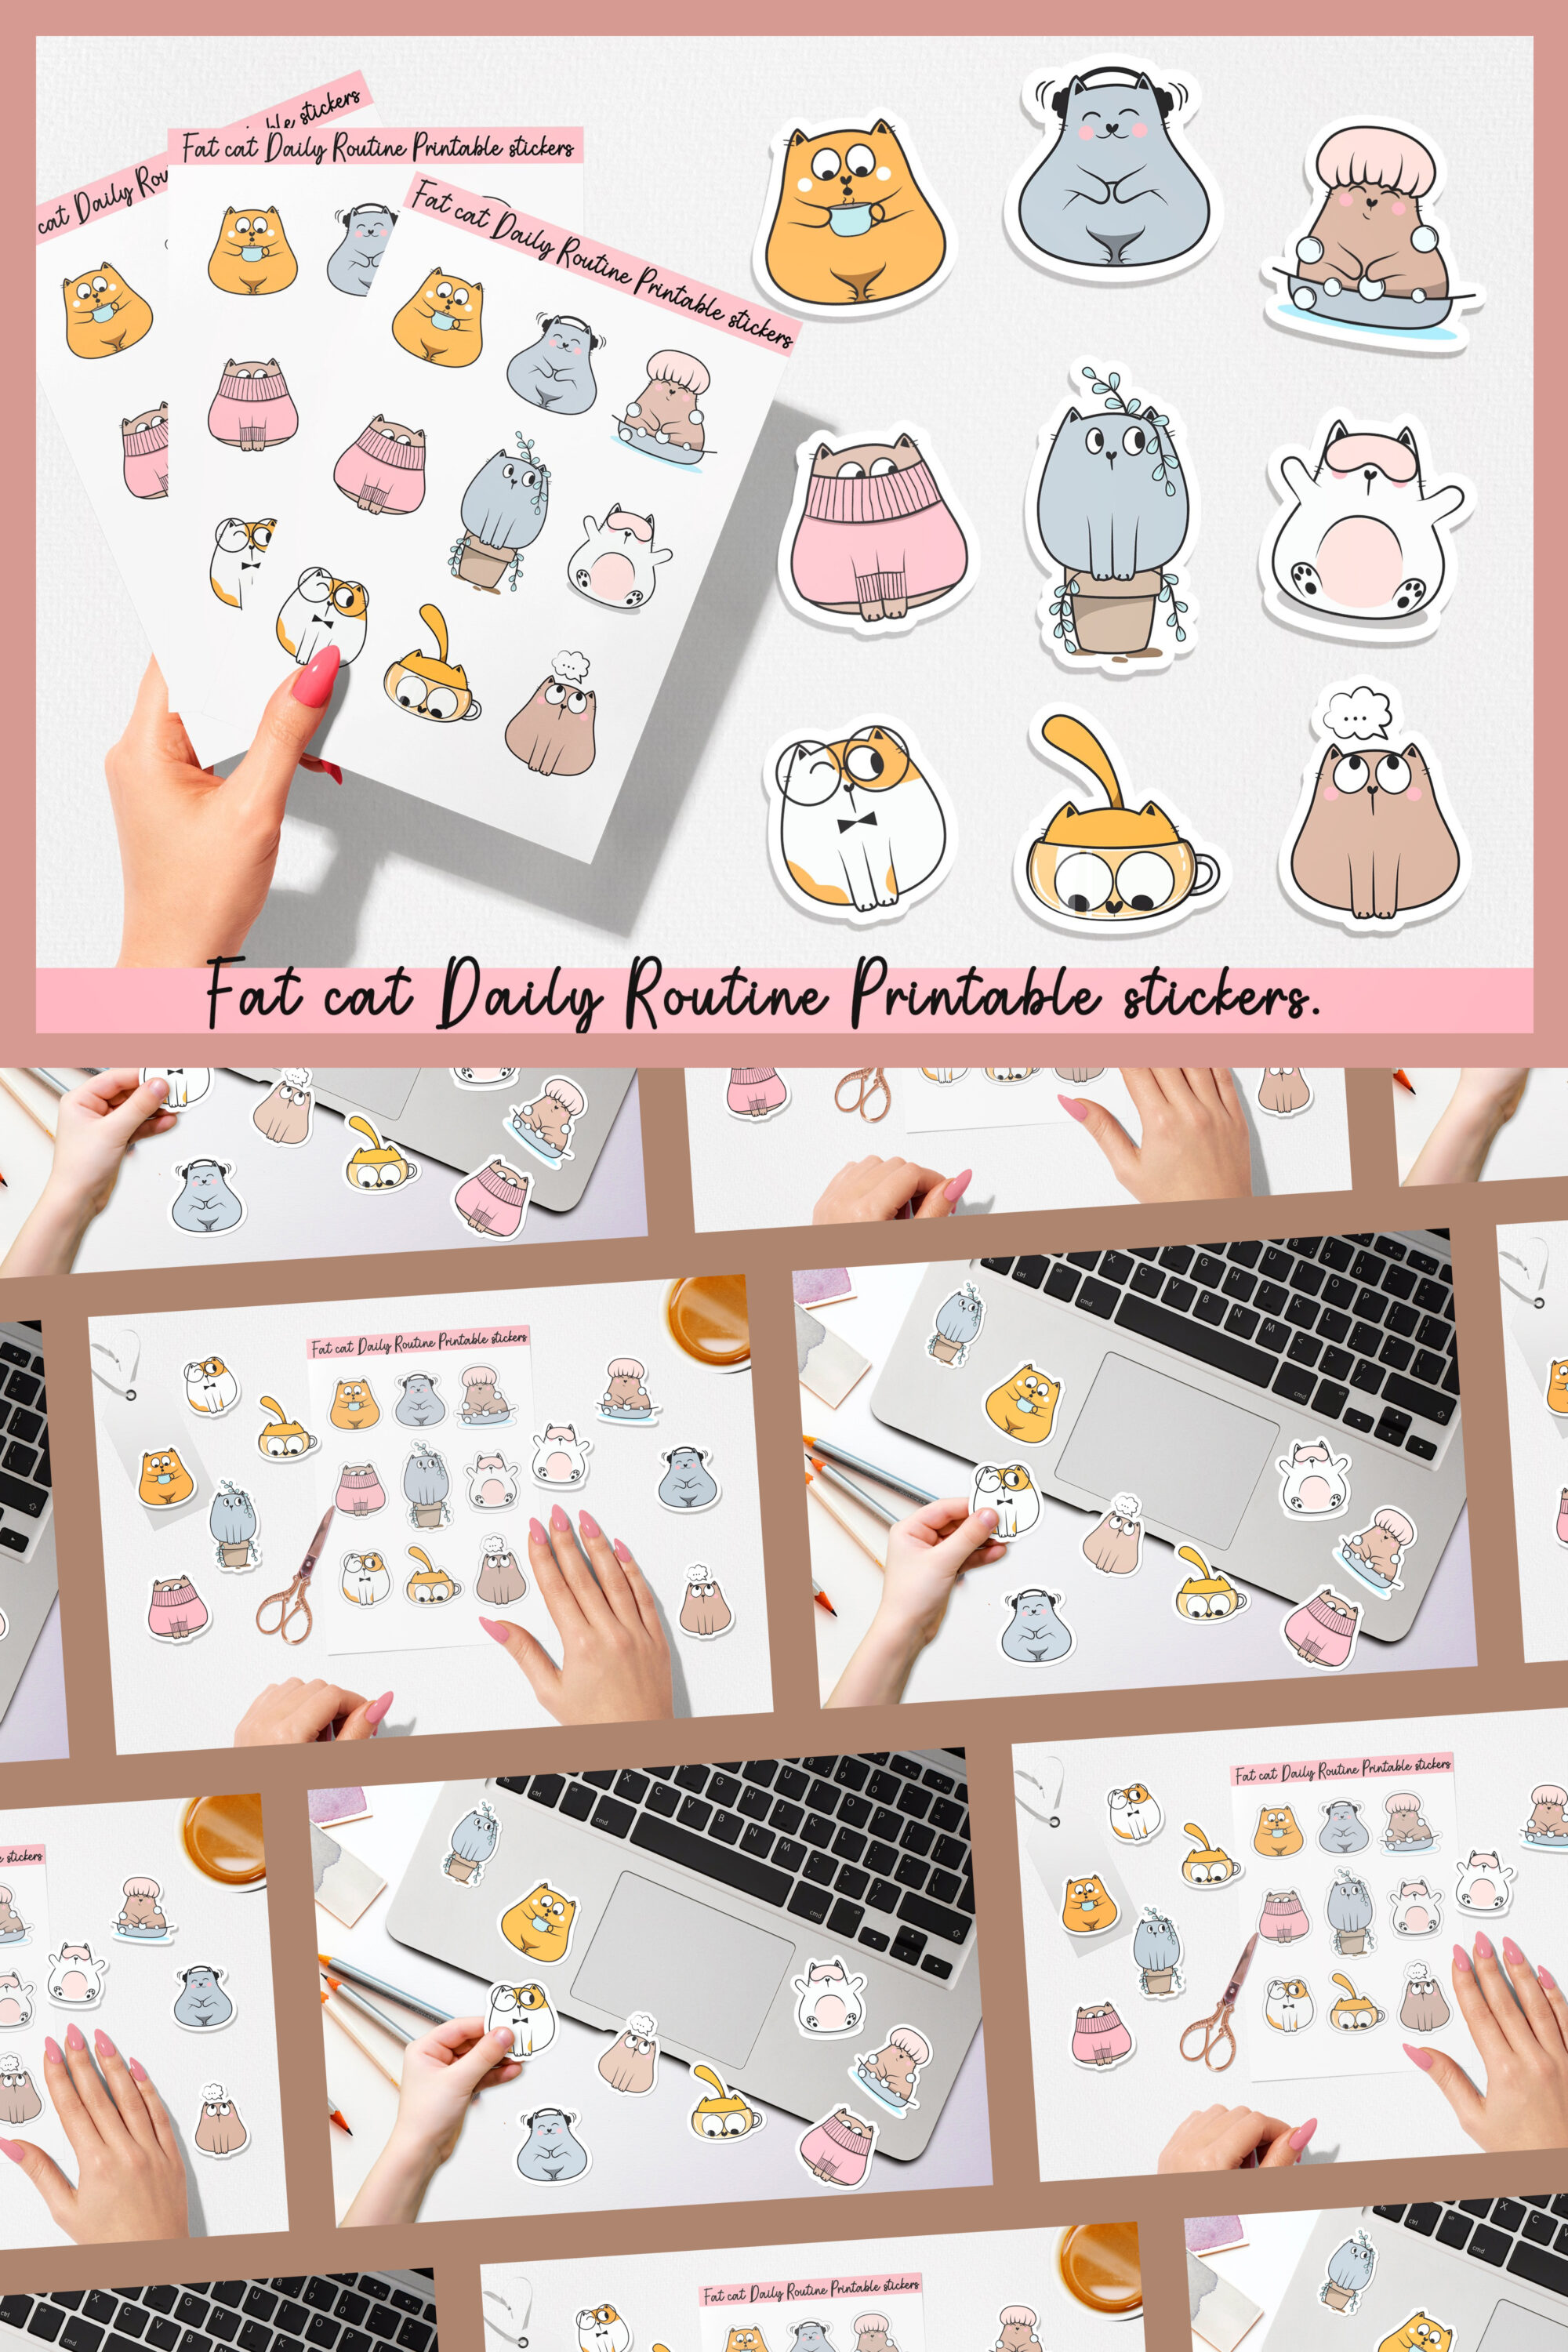 Fat cat daily routine printable stickers of pinterest.